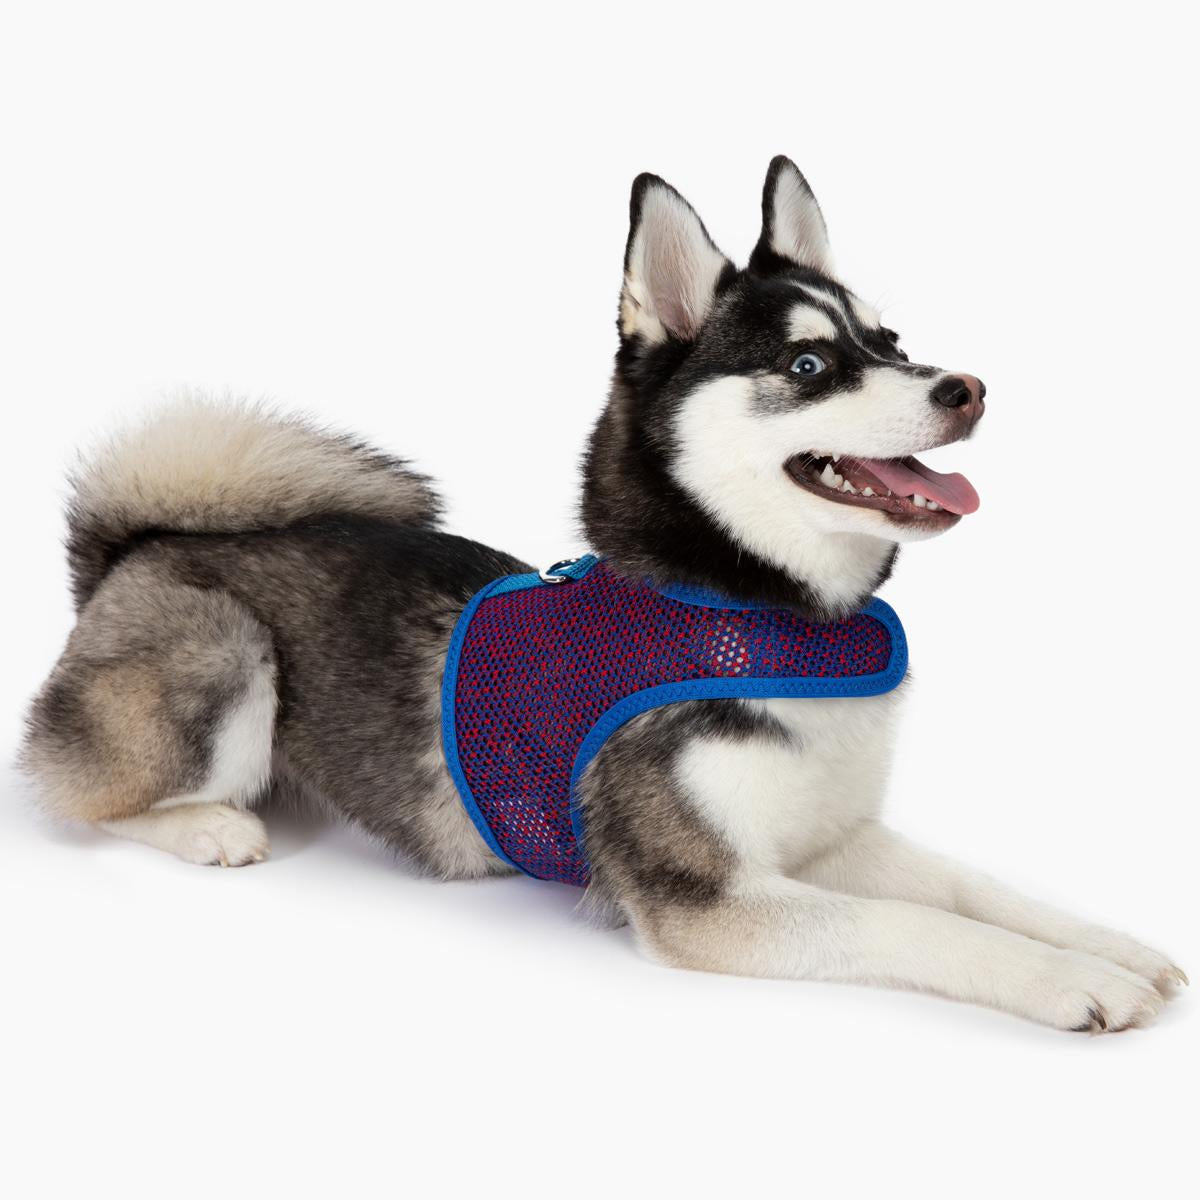 active-mesh-dog-harness-with-leash-blue-red-6383.jpg